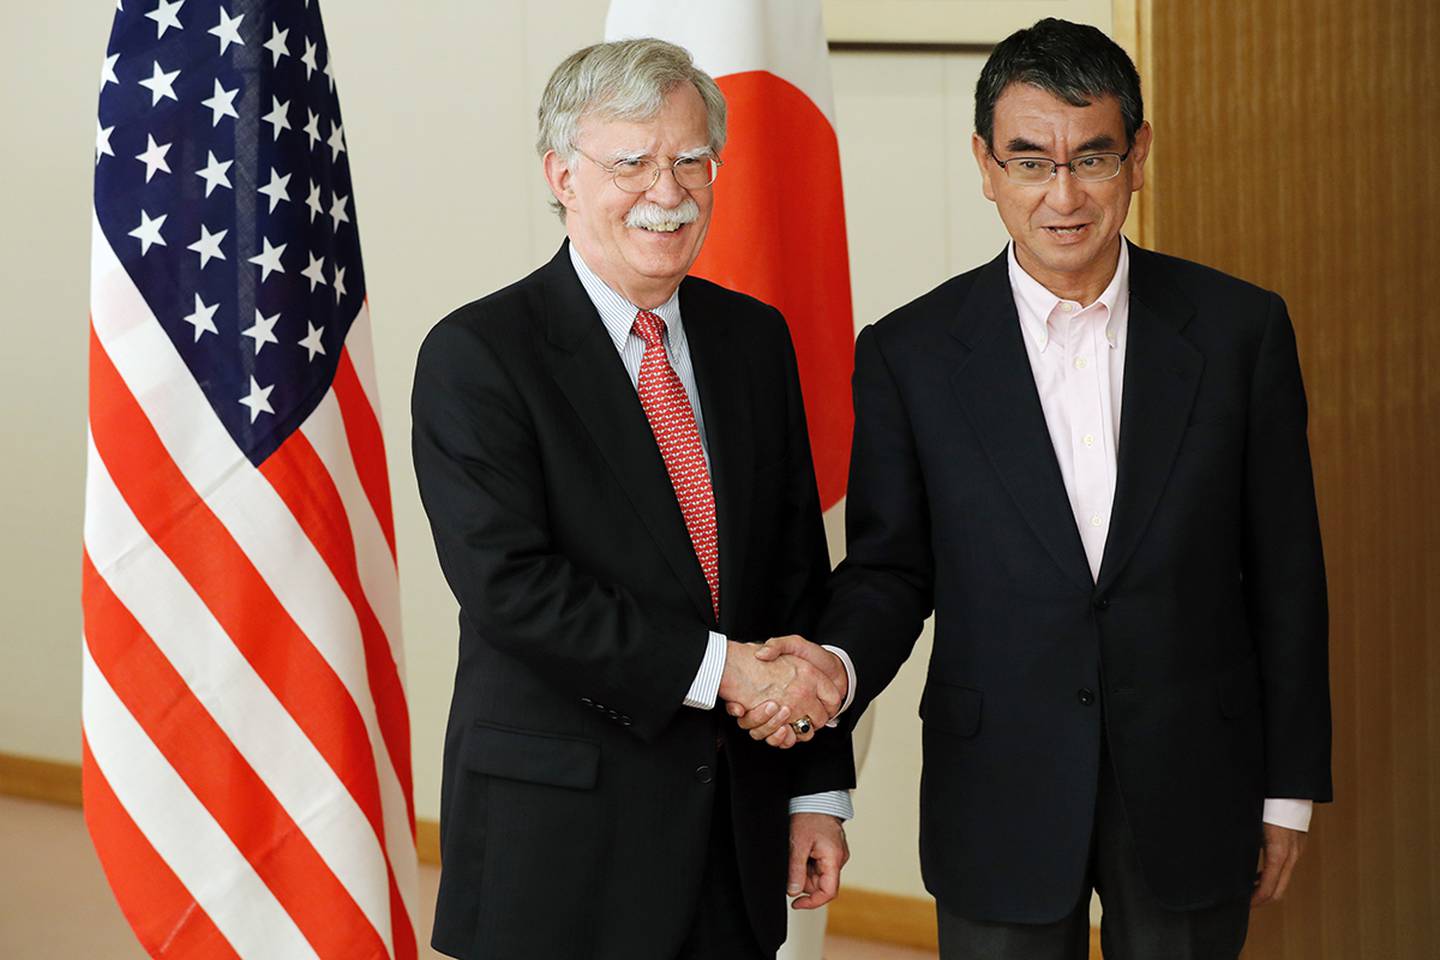 Japanese Foreign Minister Taro Kono, right, and U.S. National Security Advisor John Bolton, left, shake hands prior to their meeting in Tokyo Monday, July 22, 2019.